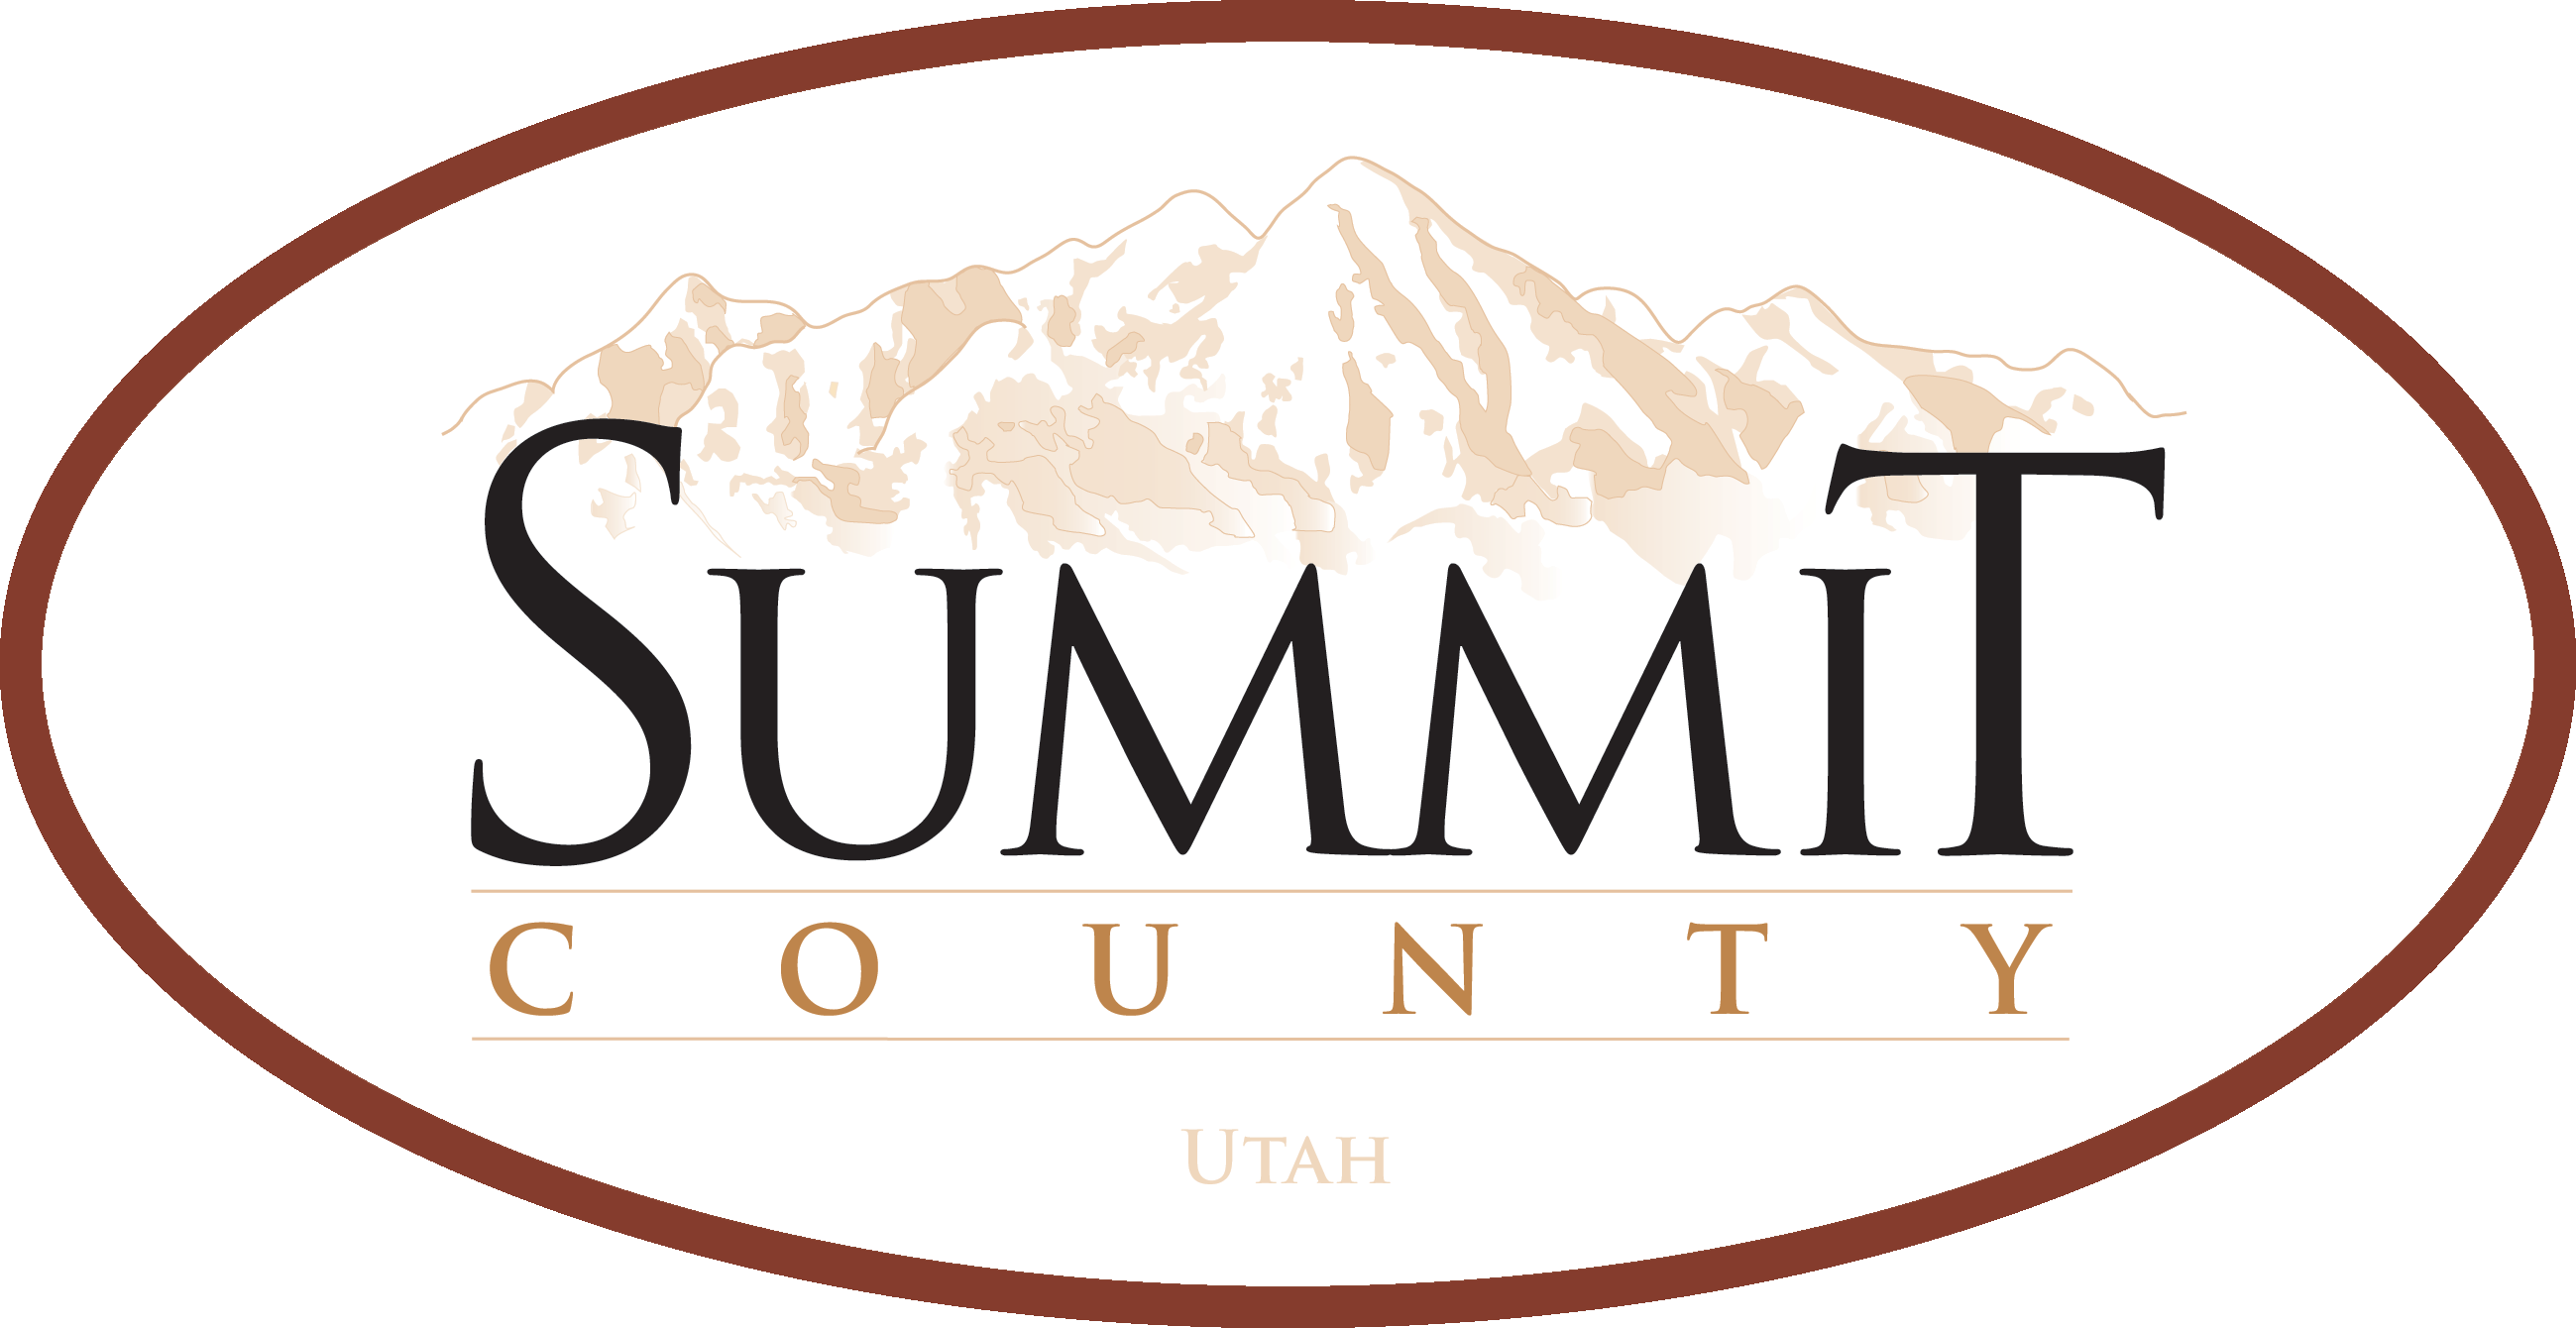 Paul's Electric Service The best electrician Summit County Utah has to